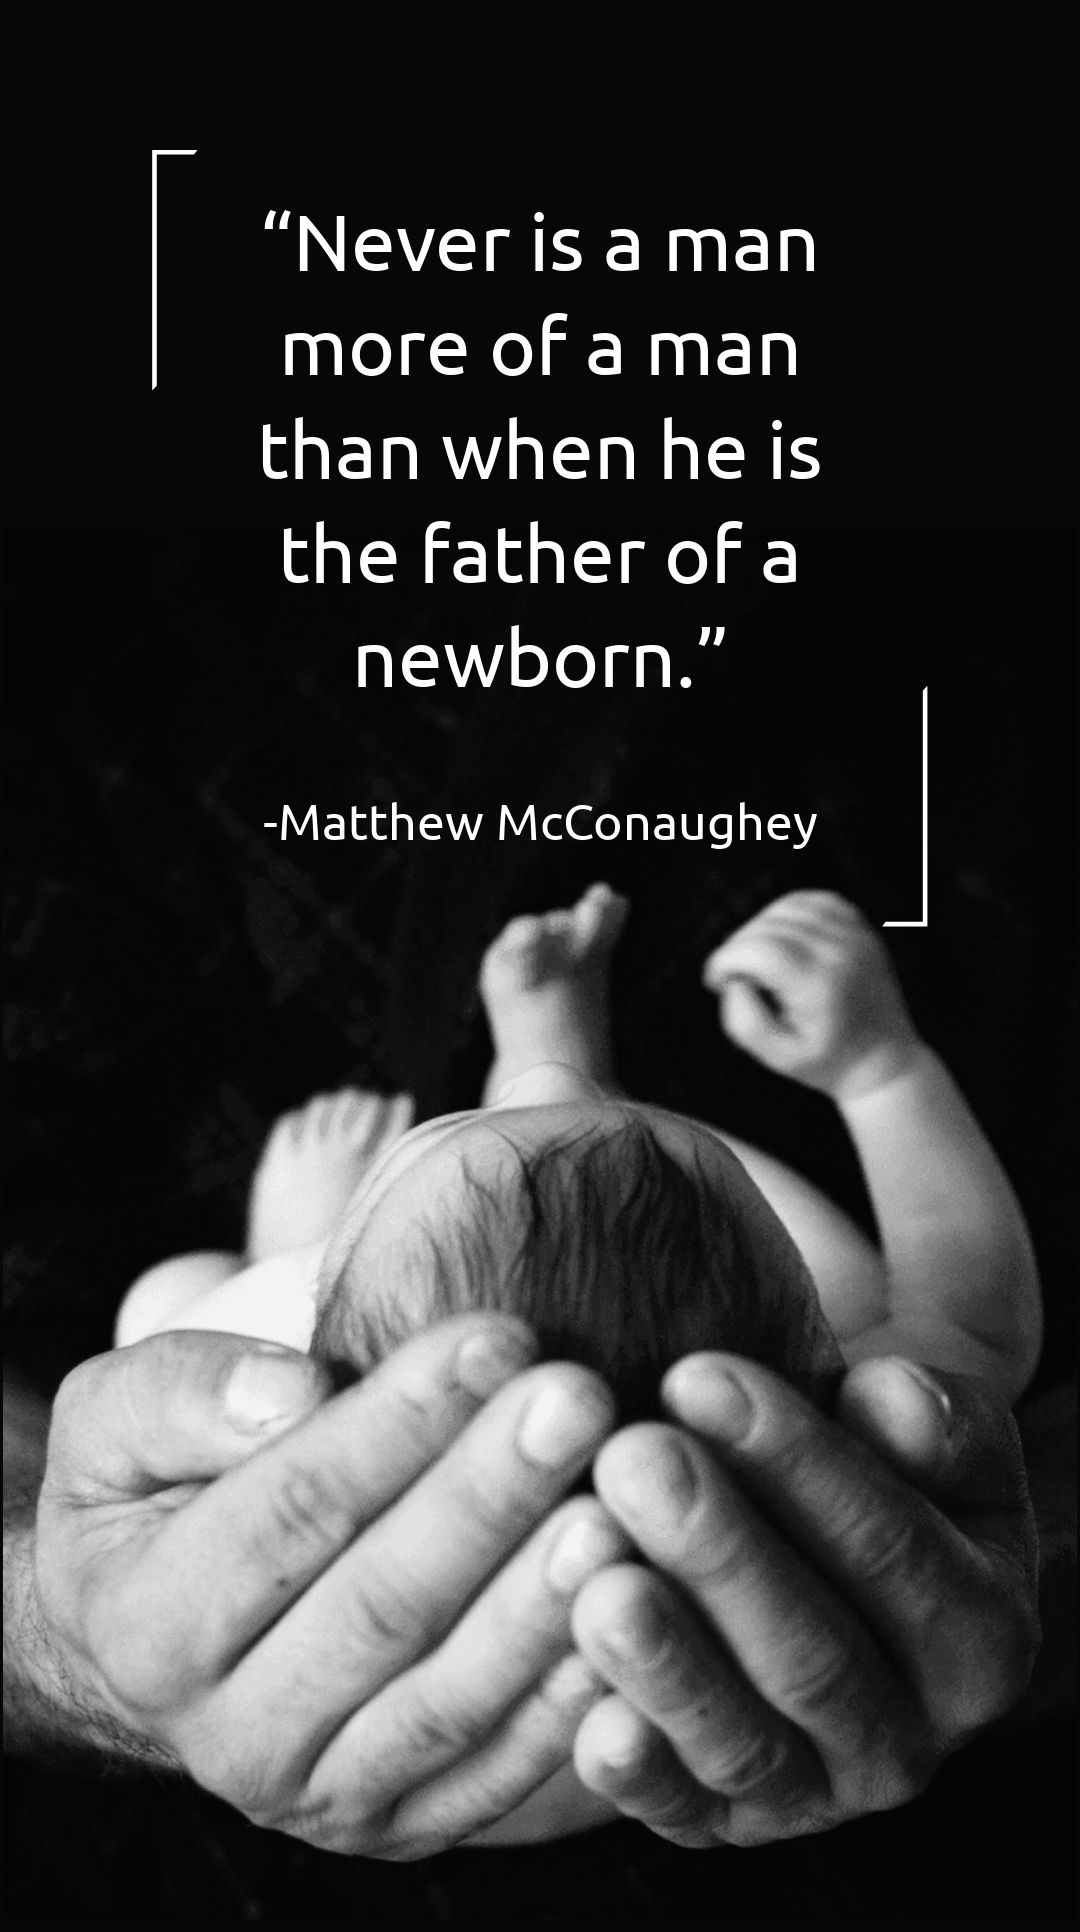 Free Matthew McConaughey - Never is a man more of a man than when he is the father of a newborn. in JPG